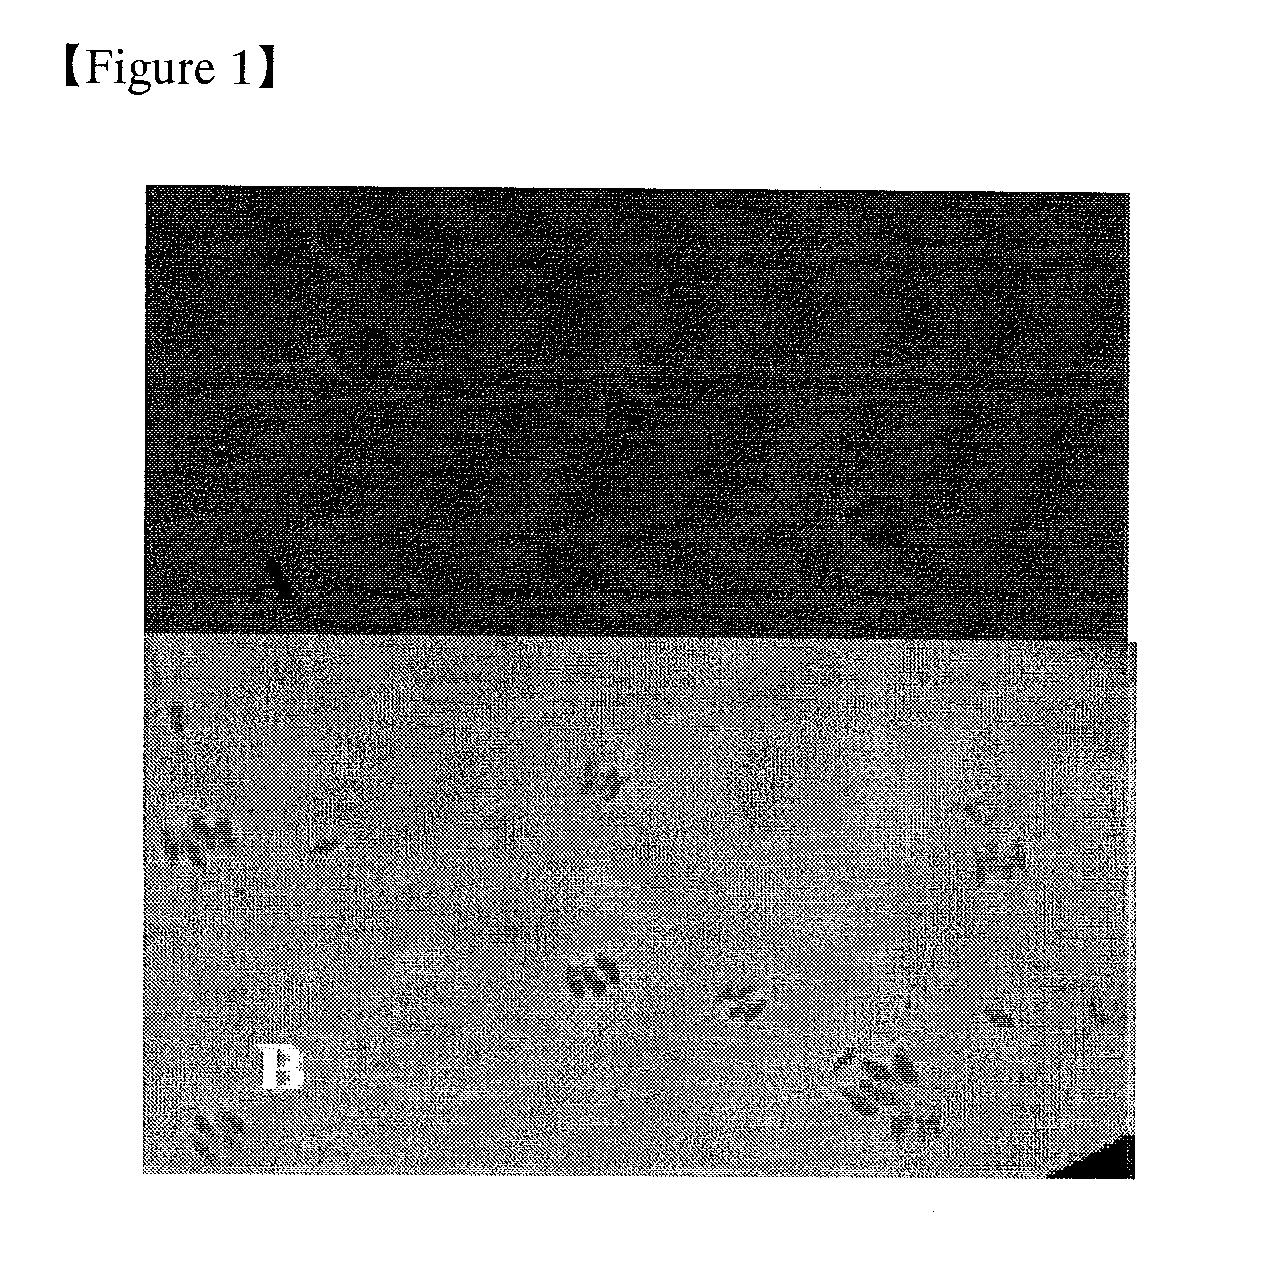 Microalgae with high-efficient ability to remove carbon dioxide and use thereof